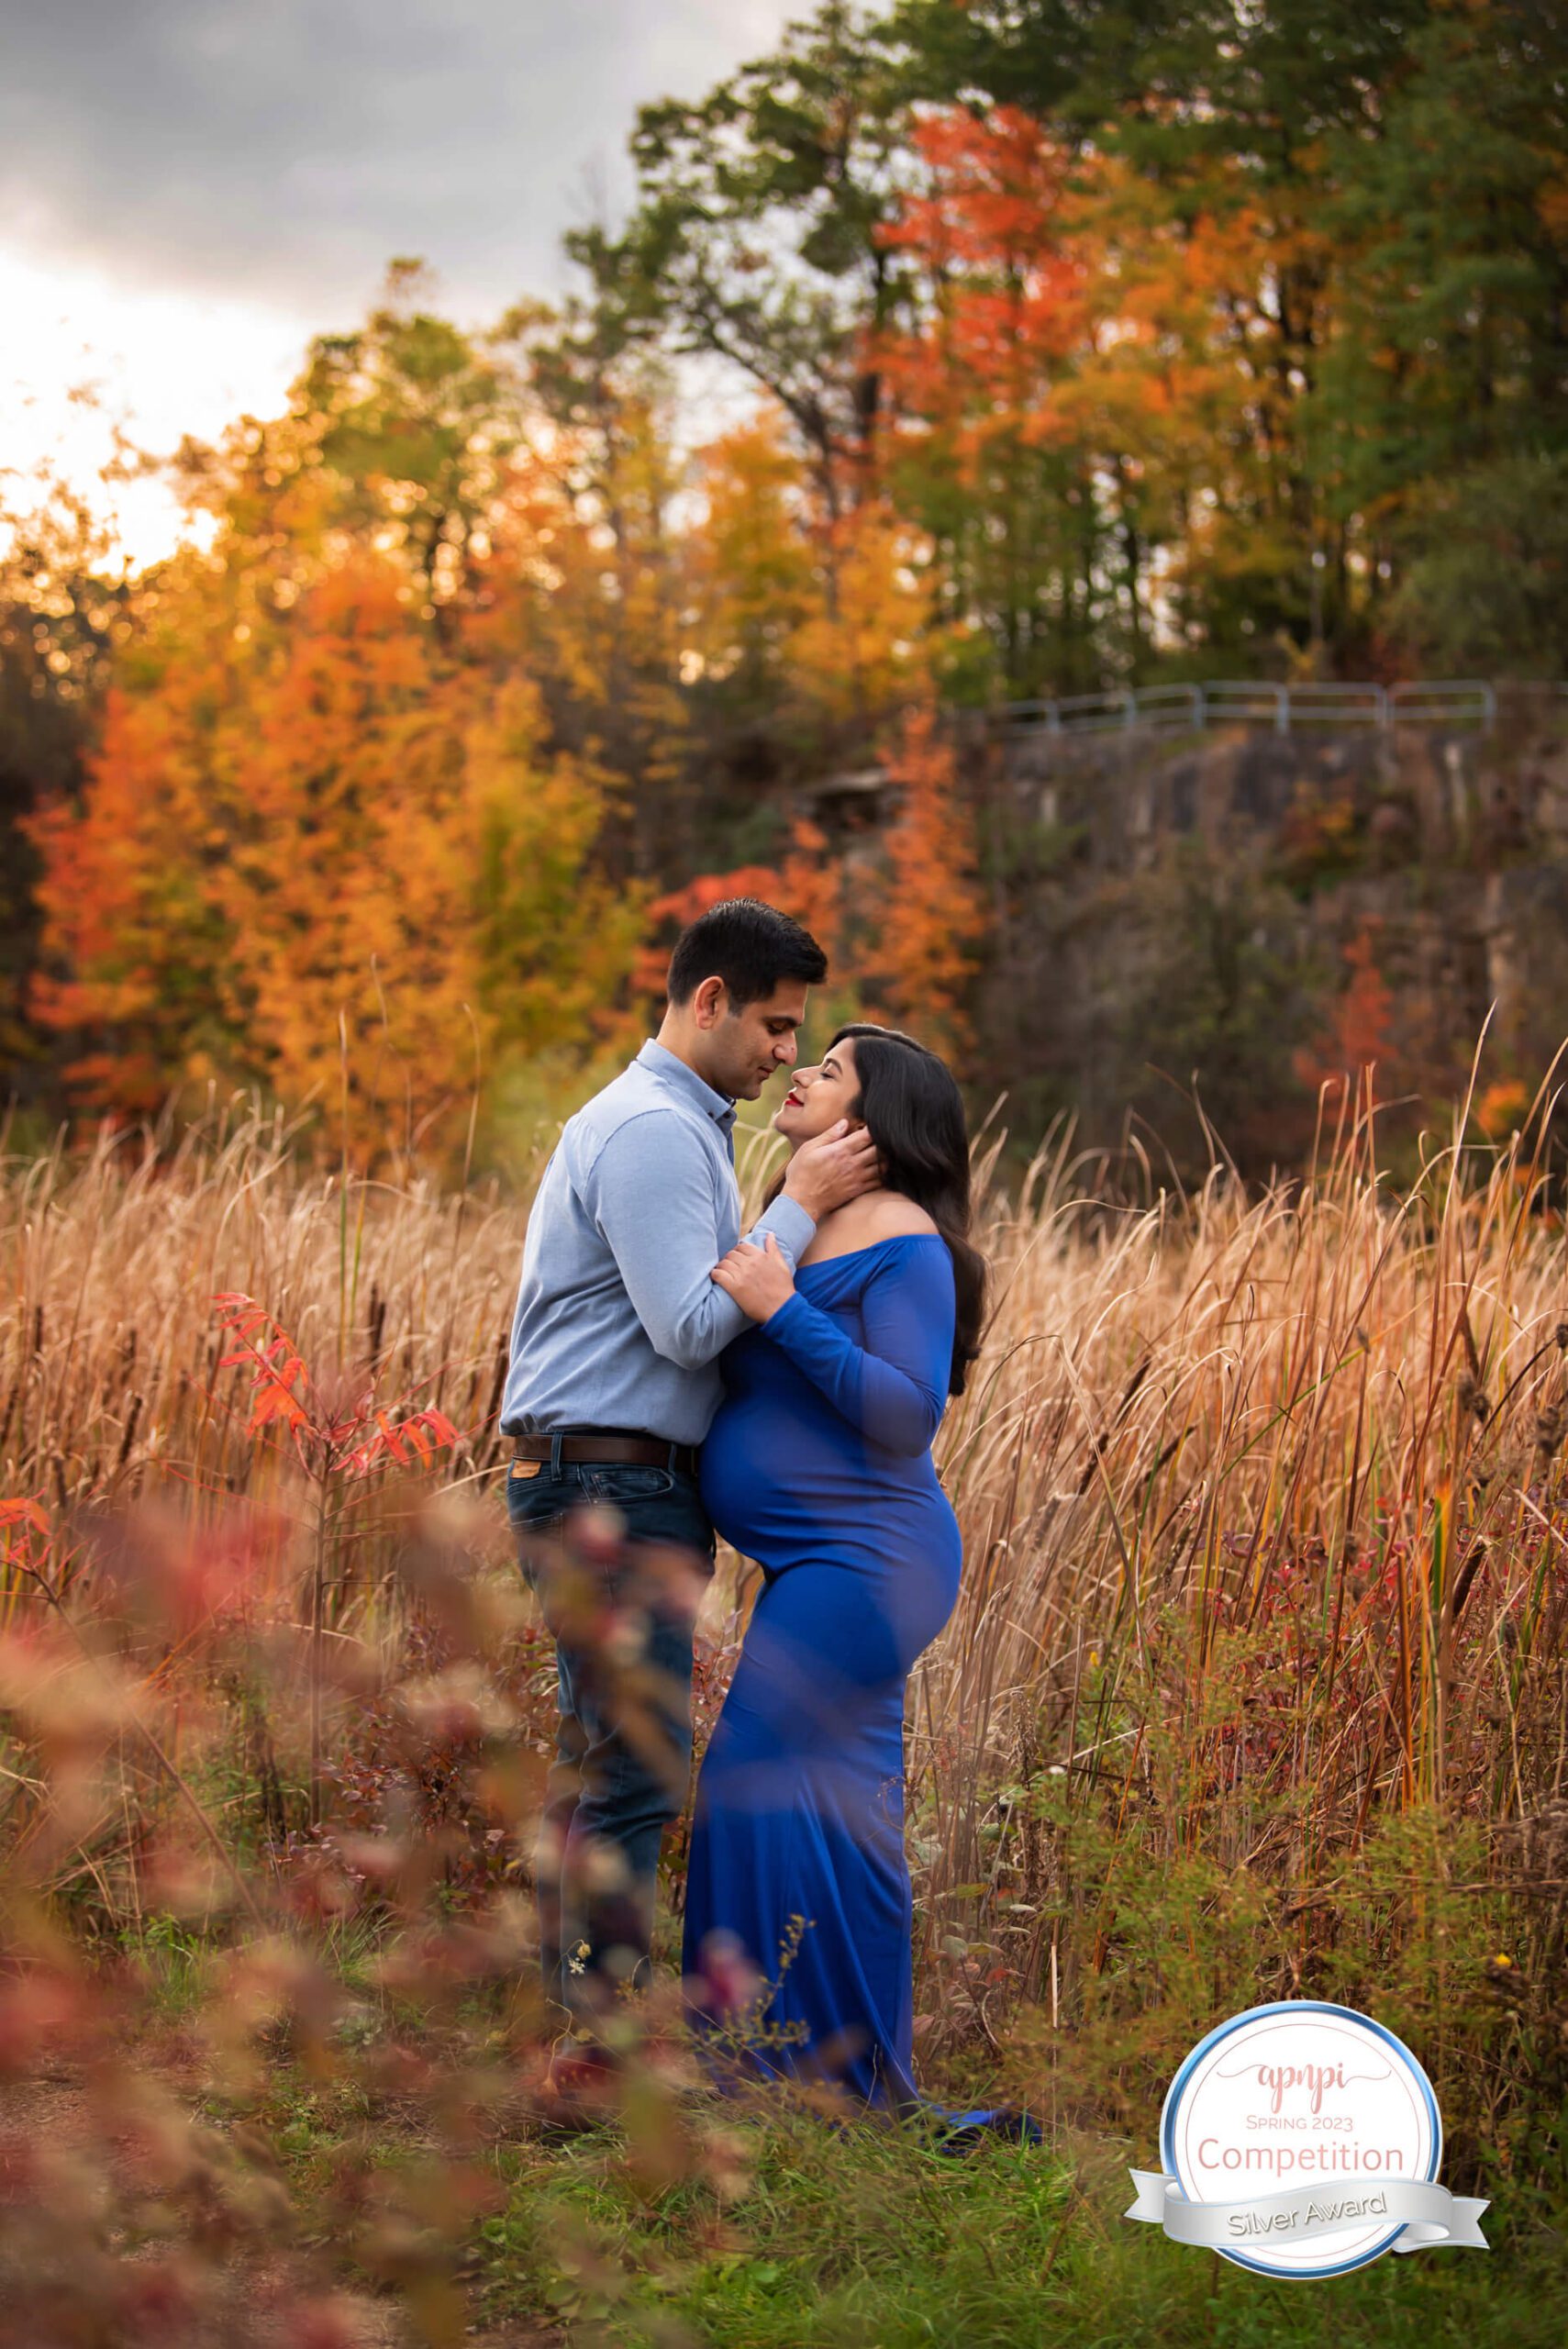 husband and wife award-winning image in the fall. Husband embracing wife's face, Hamilton, Ontario